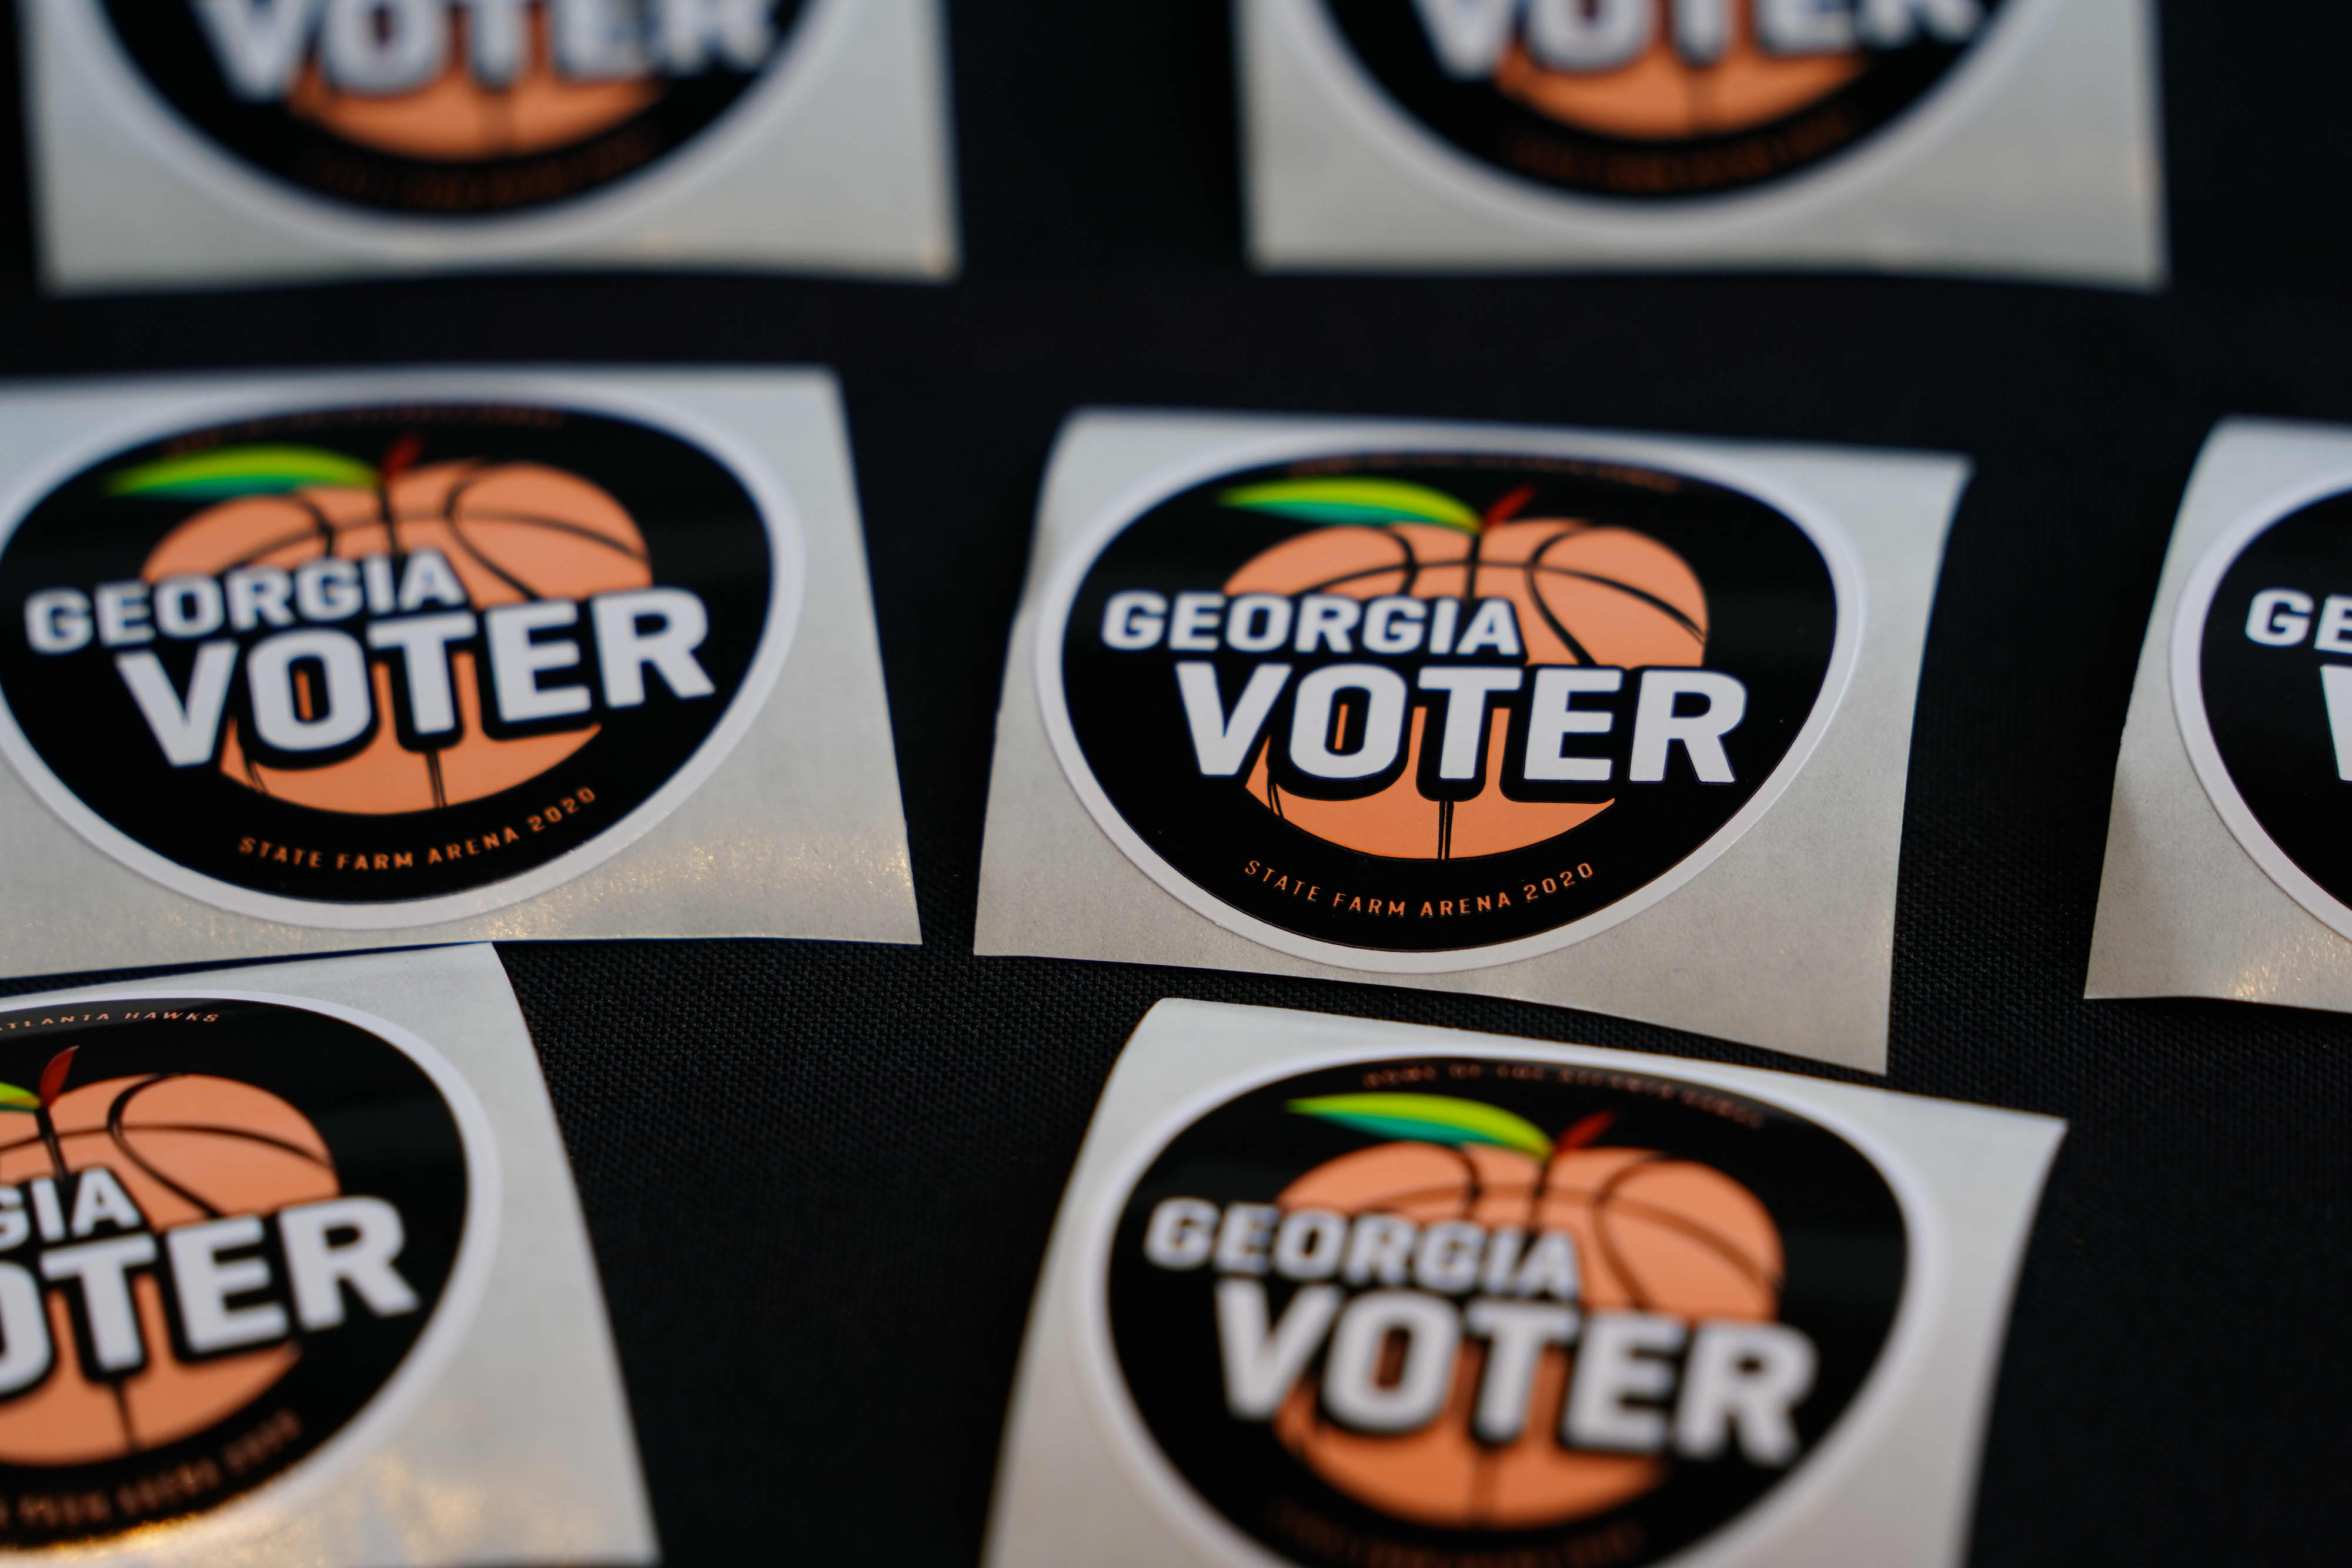 The judge says Georgia’s congressional and legislative districts are discriminatory and need to be redrawn